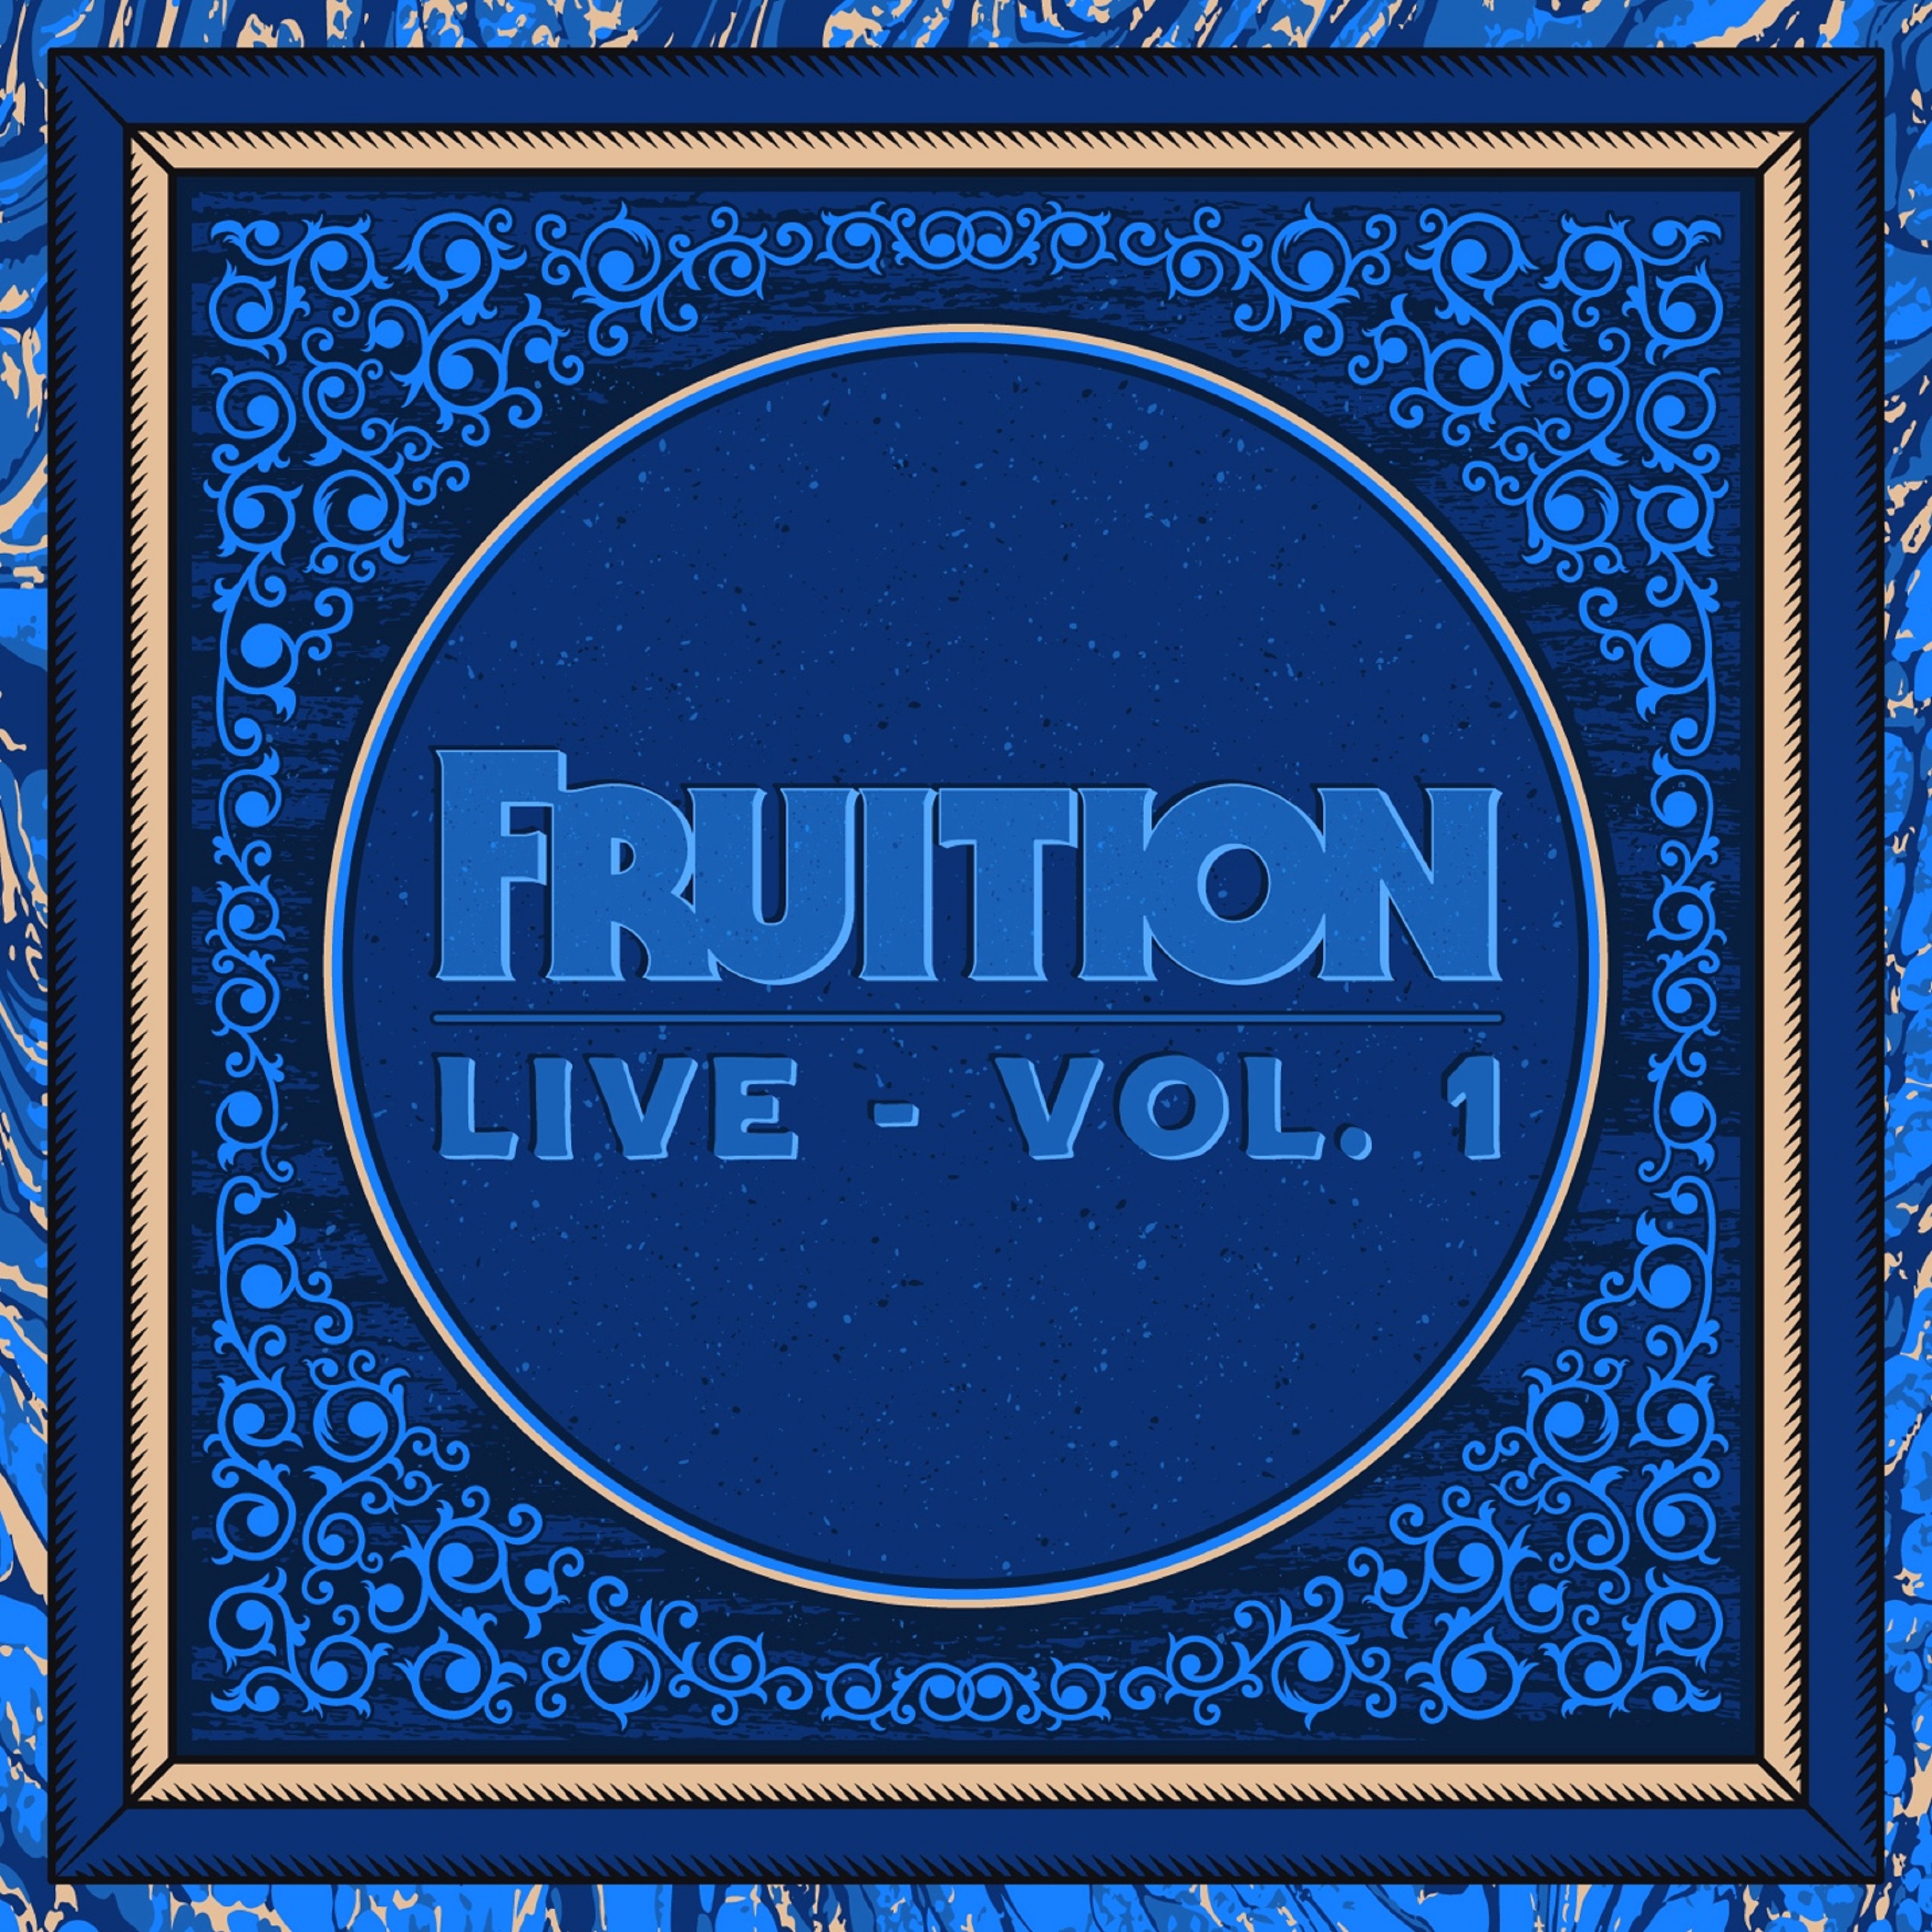 Fruition Release "Live, Vol. 1"